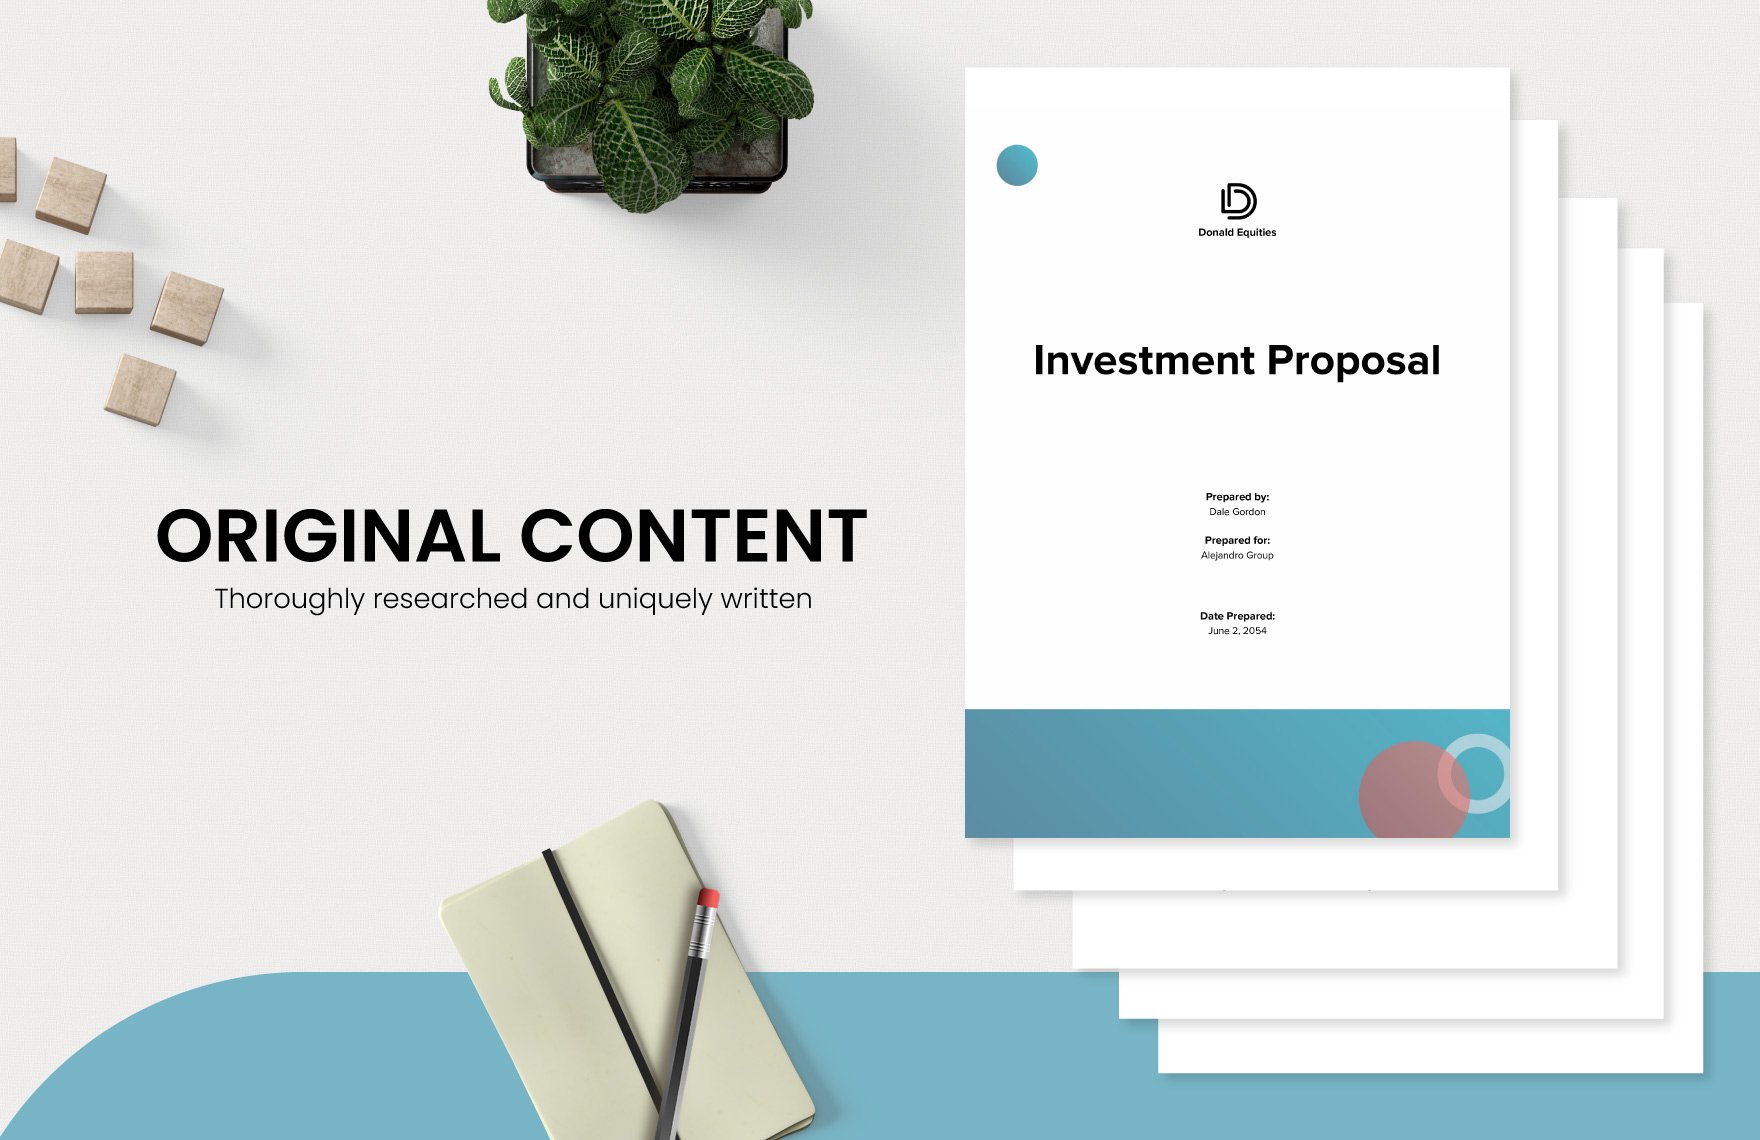 Investment Proposal Template